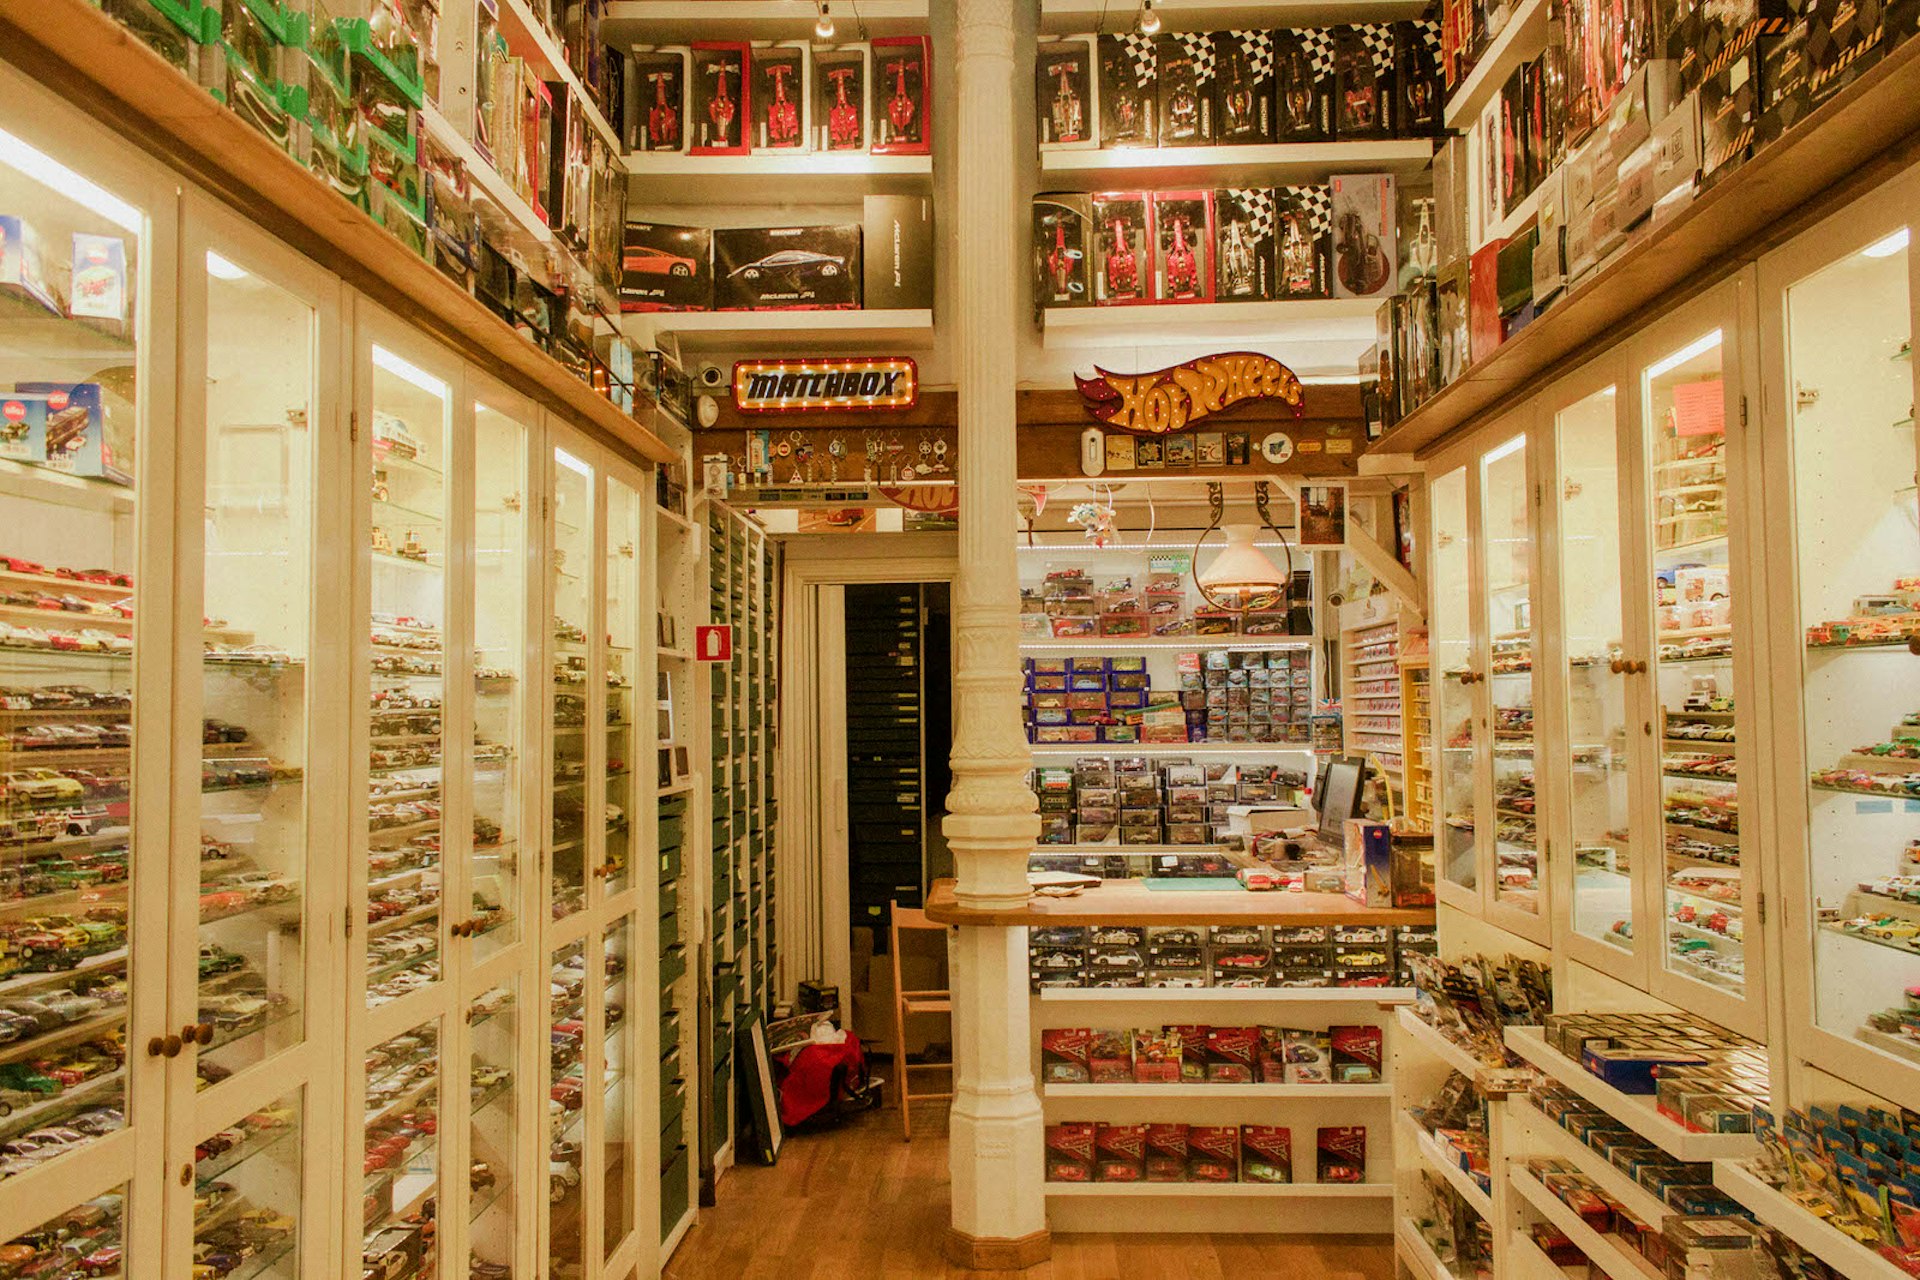 macchinine's thousands of toy cars, arranged by brand, line the white glass-front shelves in a high-ceilinged shop in Madrid